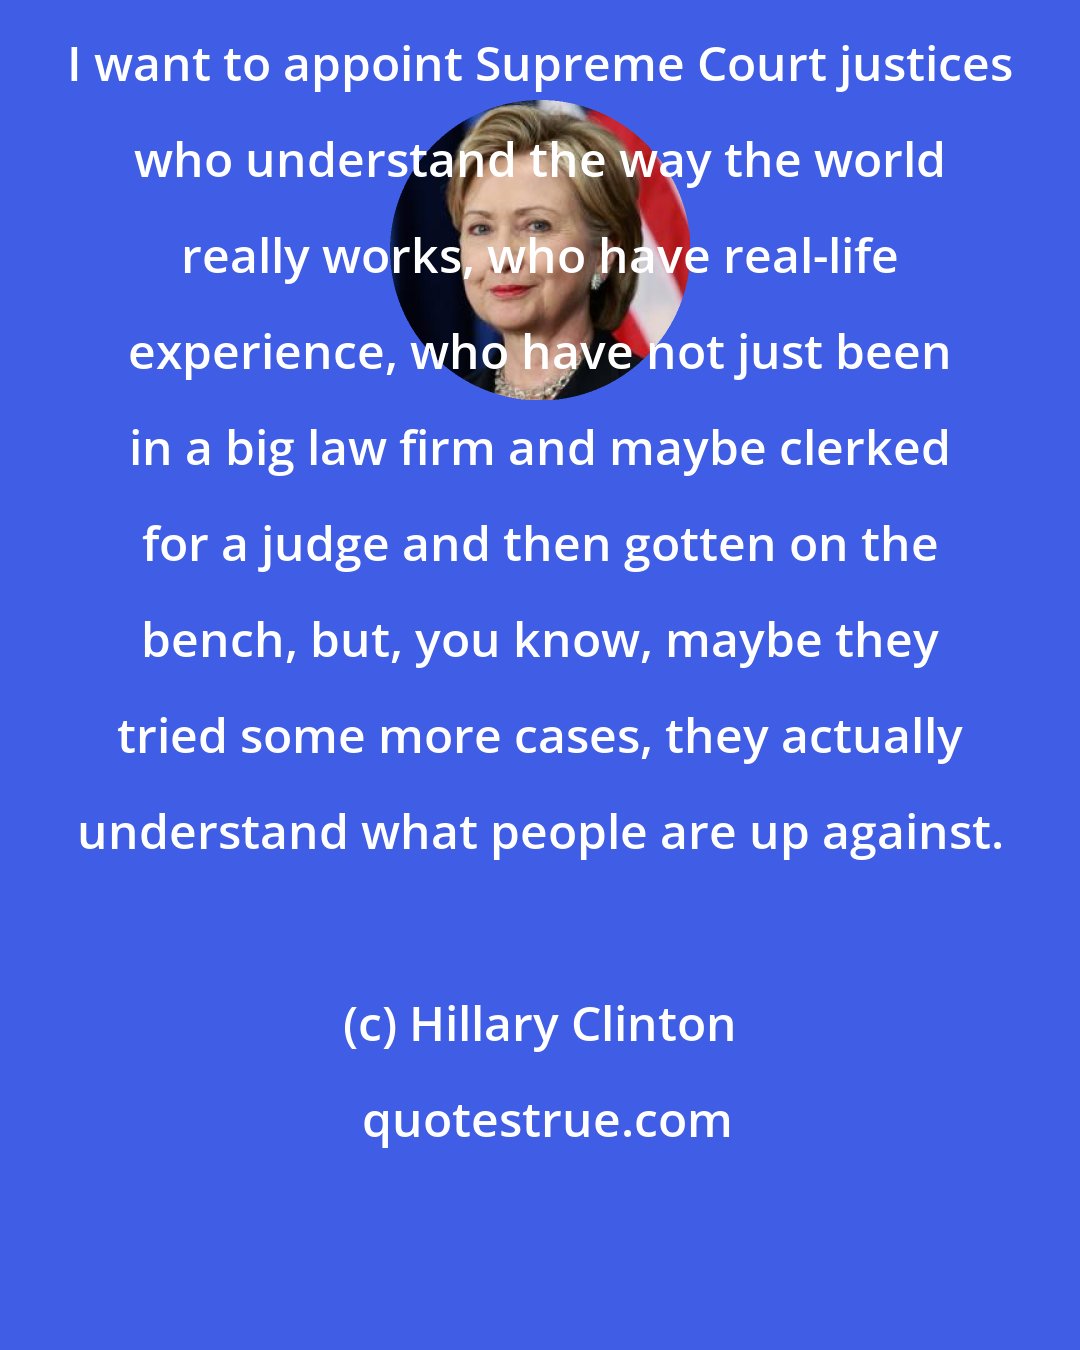 Hillary Clinton: I want to appoint Supreme Court justices who understand the way the world really works, who have real-life experience, who have not just been in a big law firm and maybe clerked for a judge and then gotten on the bench, but, you know, maybe they tried some more cases, they actually understand what people are up against.